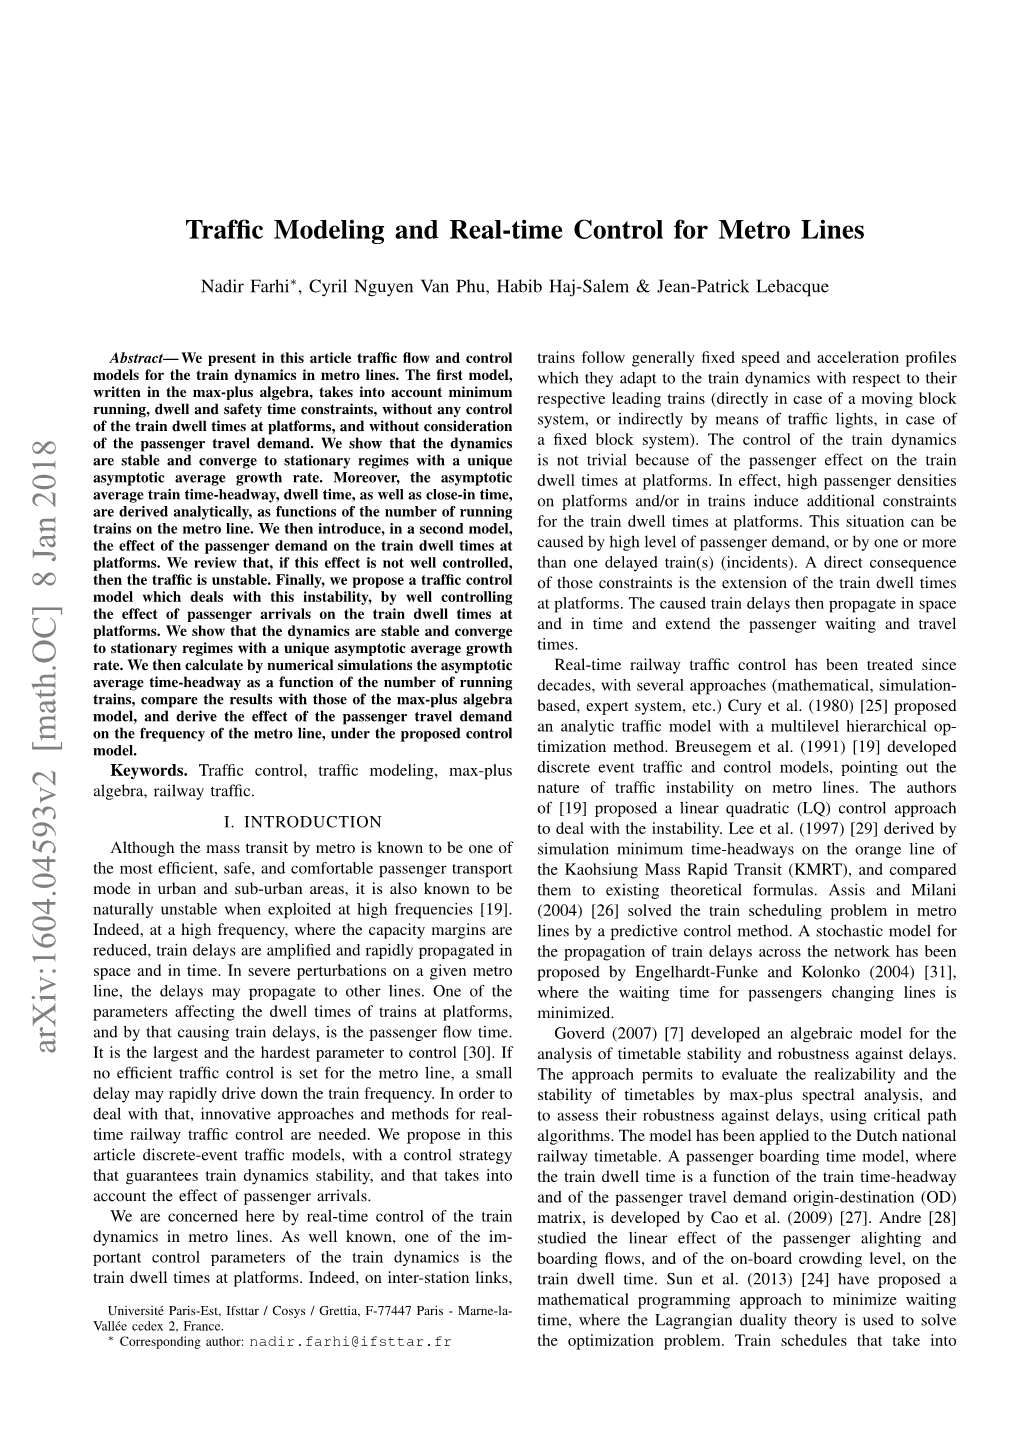 Traffic Modeling and Real-Time Control for Metro Lines